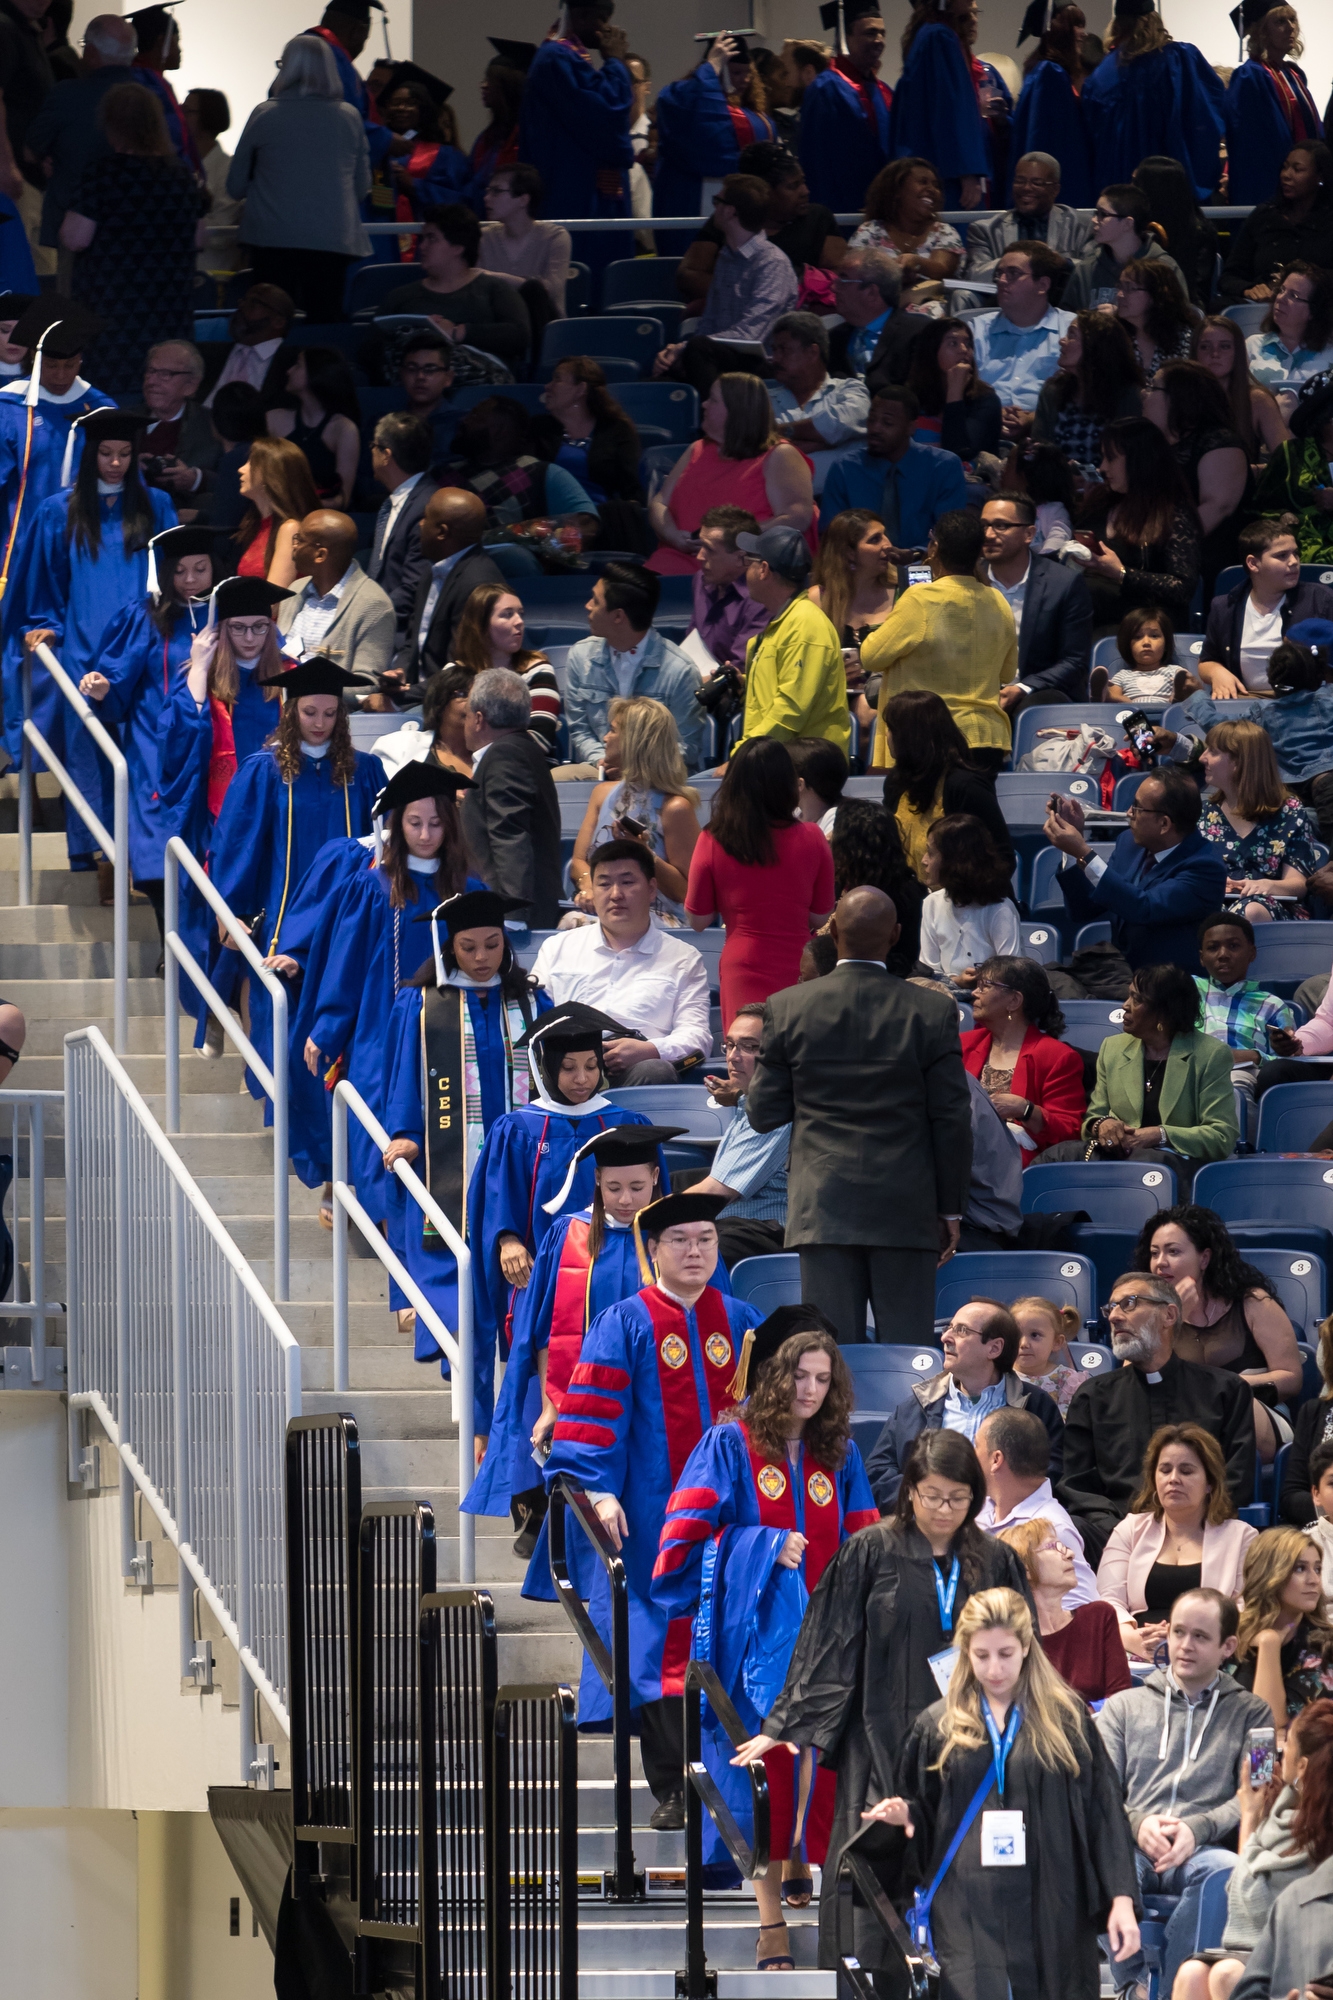 Graduates in the College of Liberal Arts and Social Sciences and the School for New Learning make their way into Wintrust Arena for their commencement ceremony. (DePaul University/Jeff Carrion)